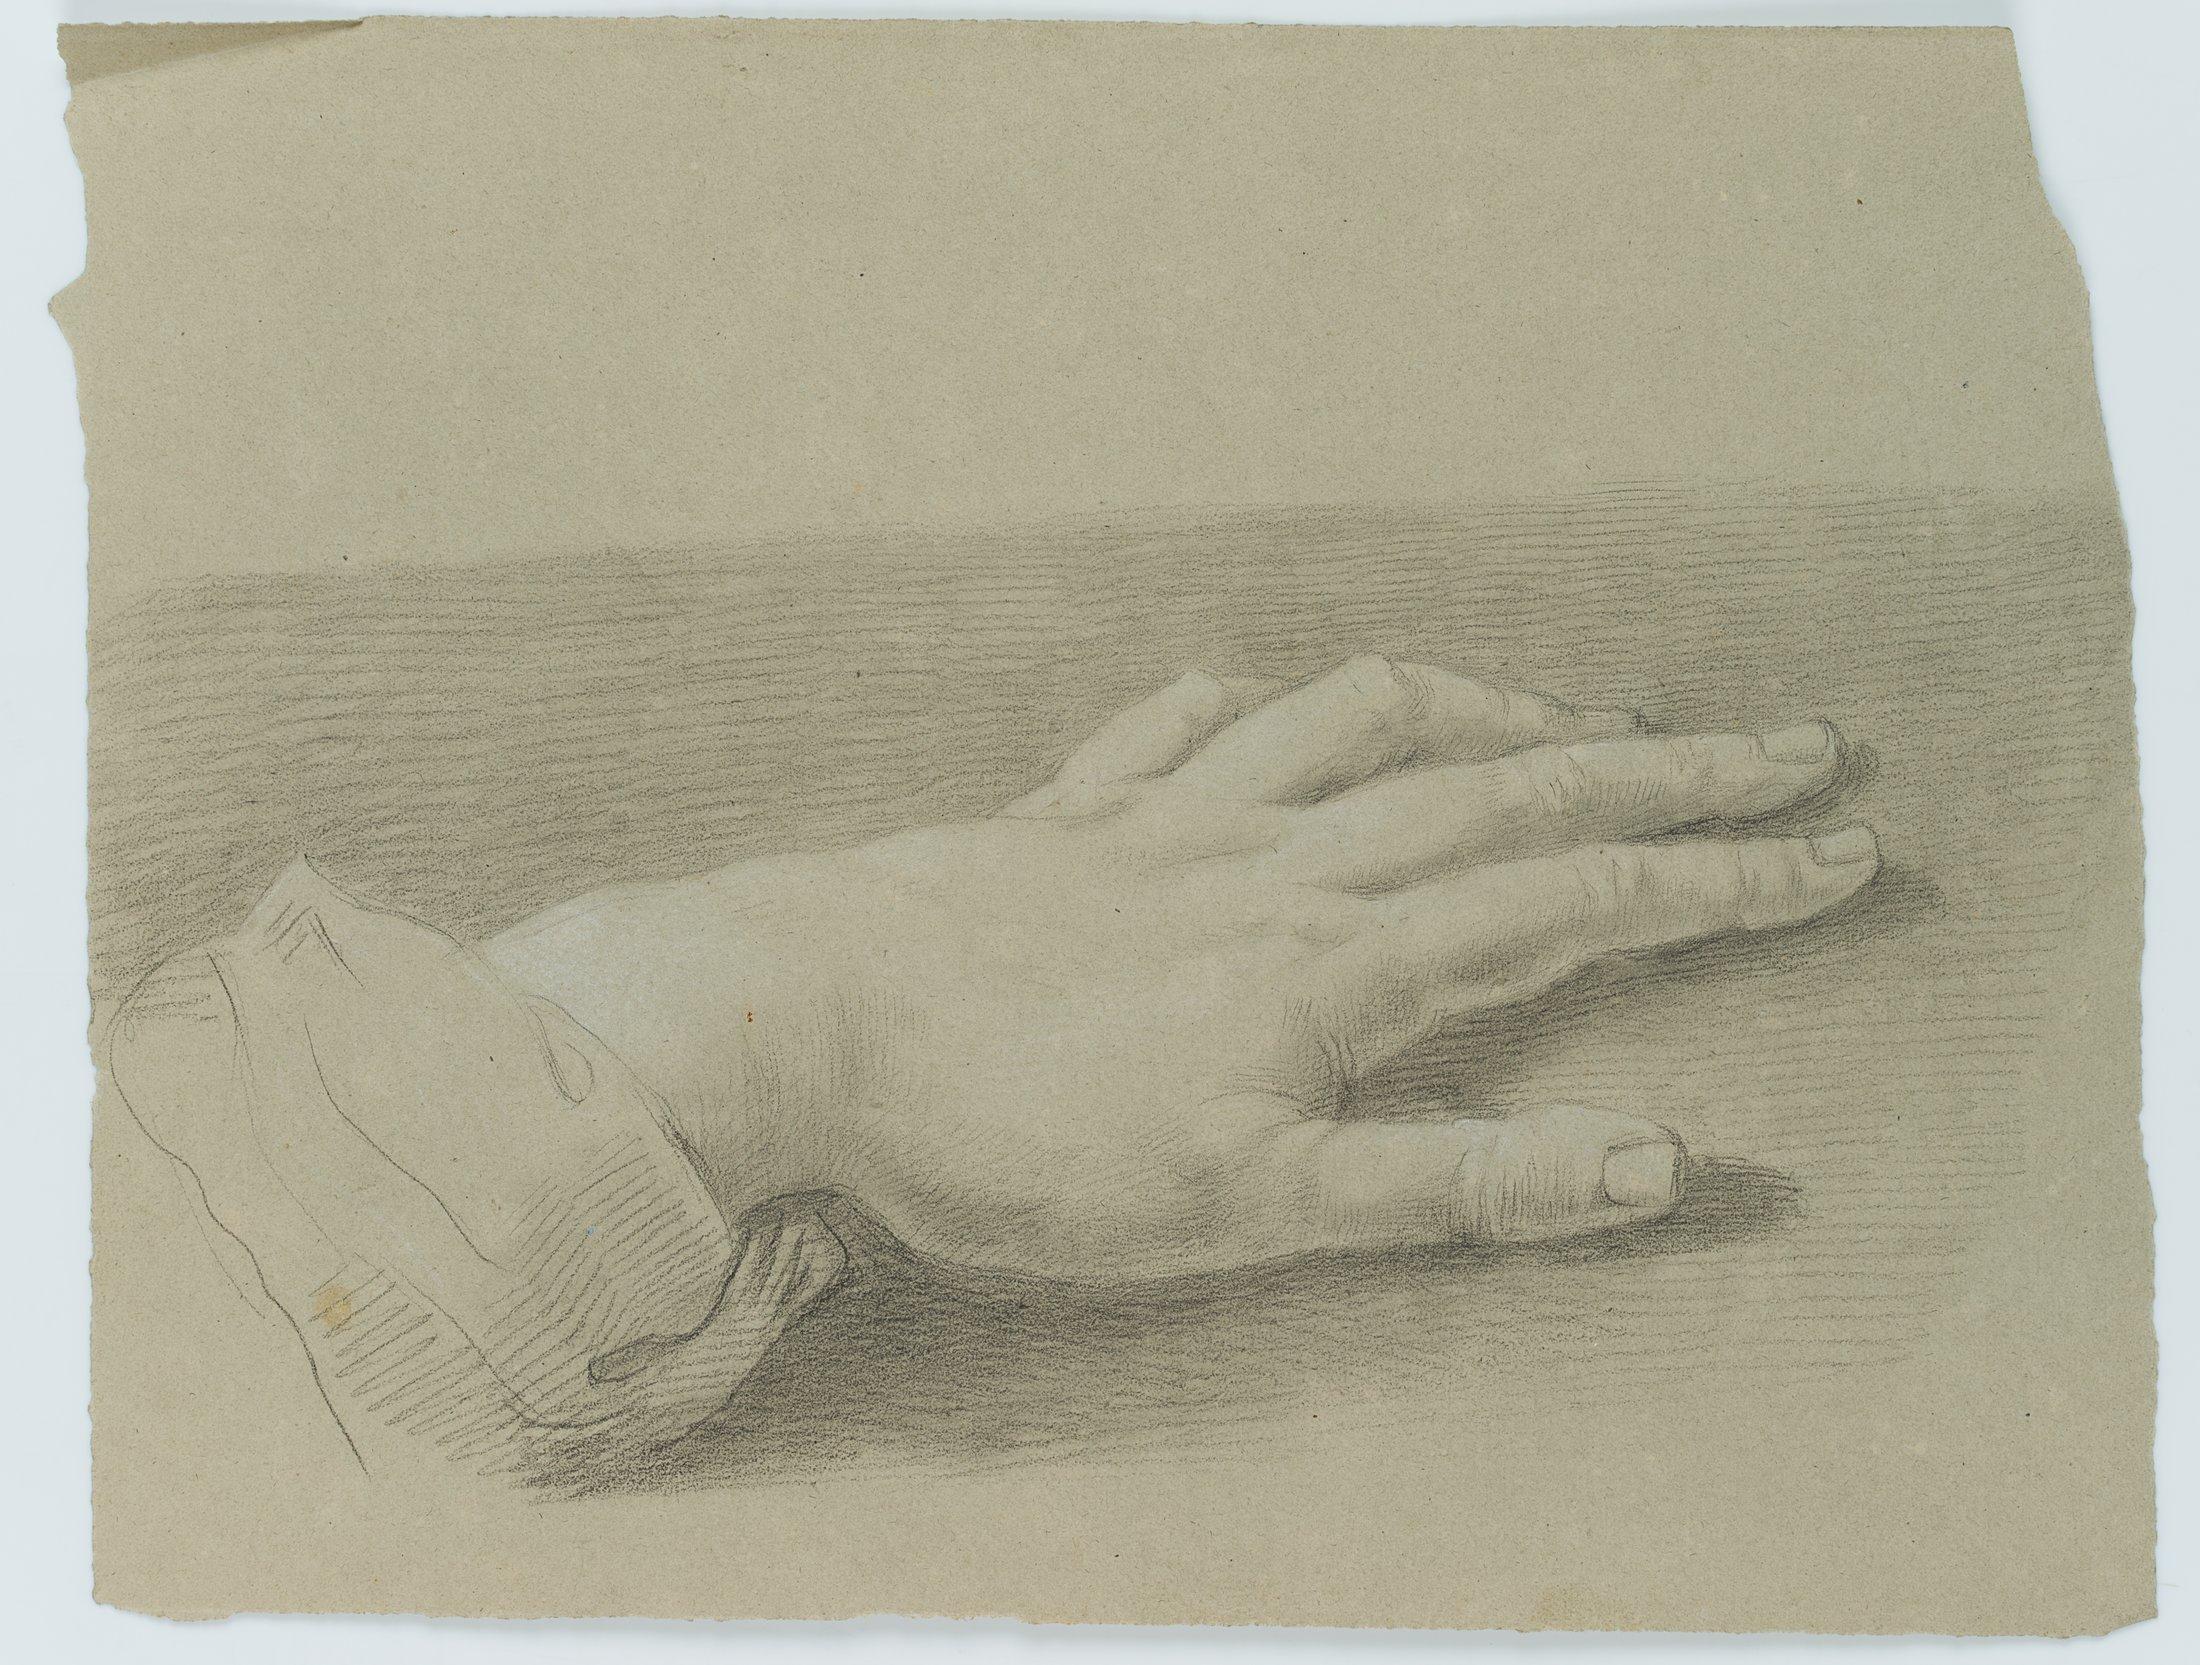 Trajan Wallis (1794-1892): Study after the artist's hand - Art by Unknown